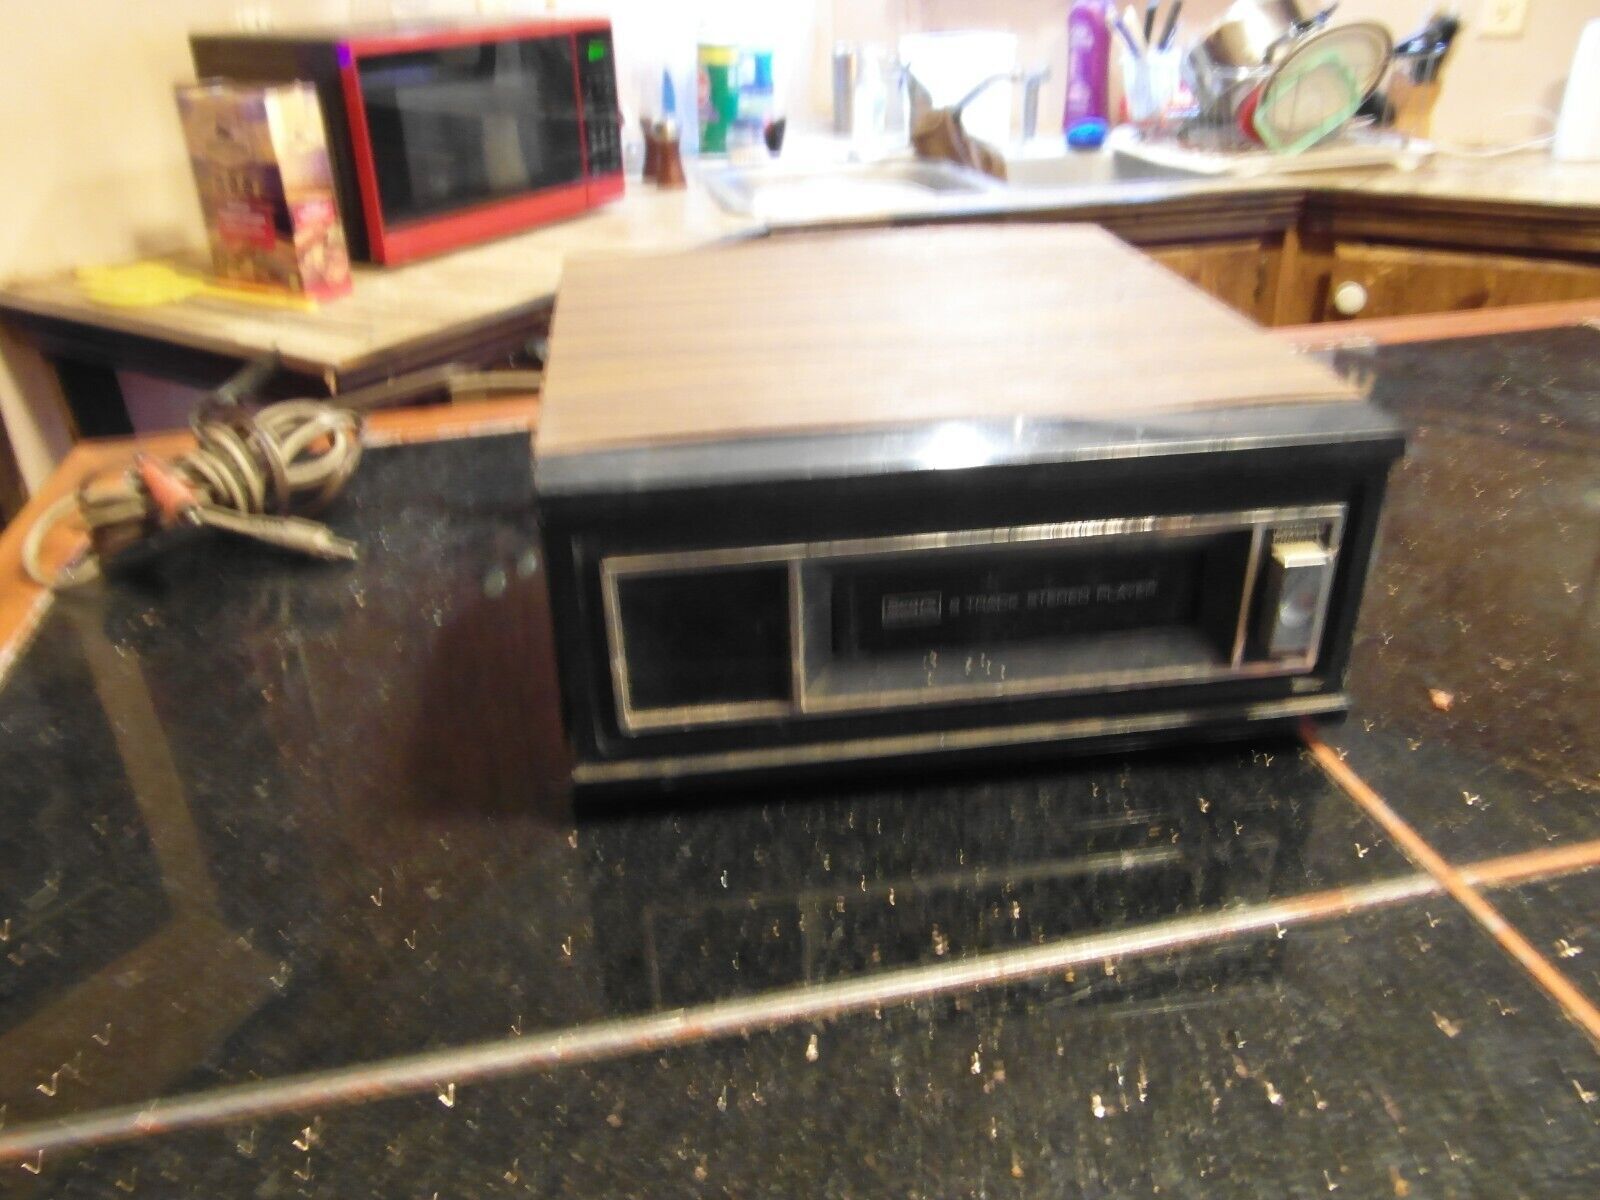 Primary image for Vintage Sears 8 Track Stereo Player Model 400 Made in Japan